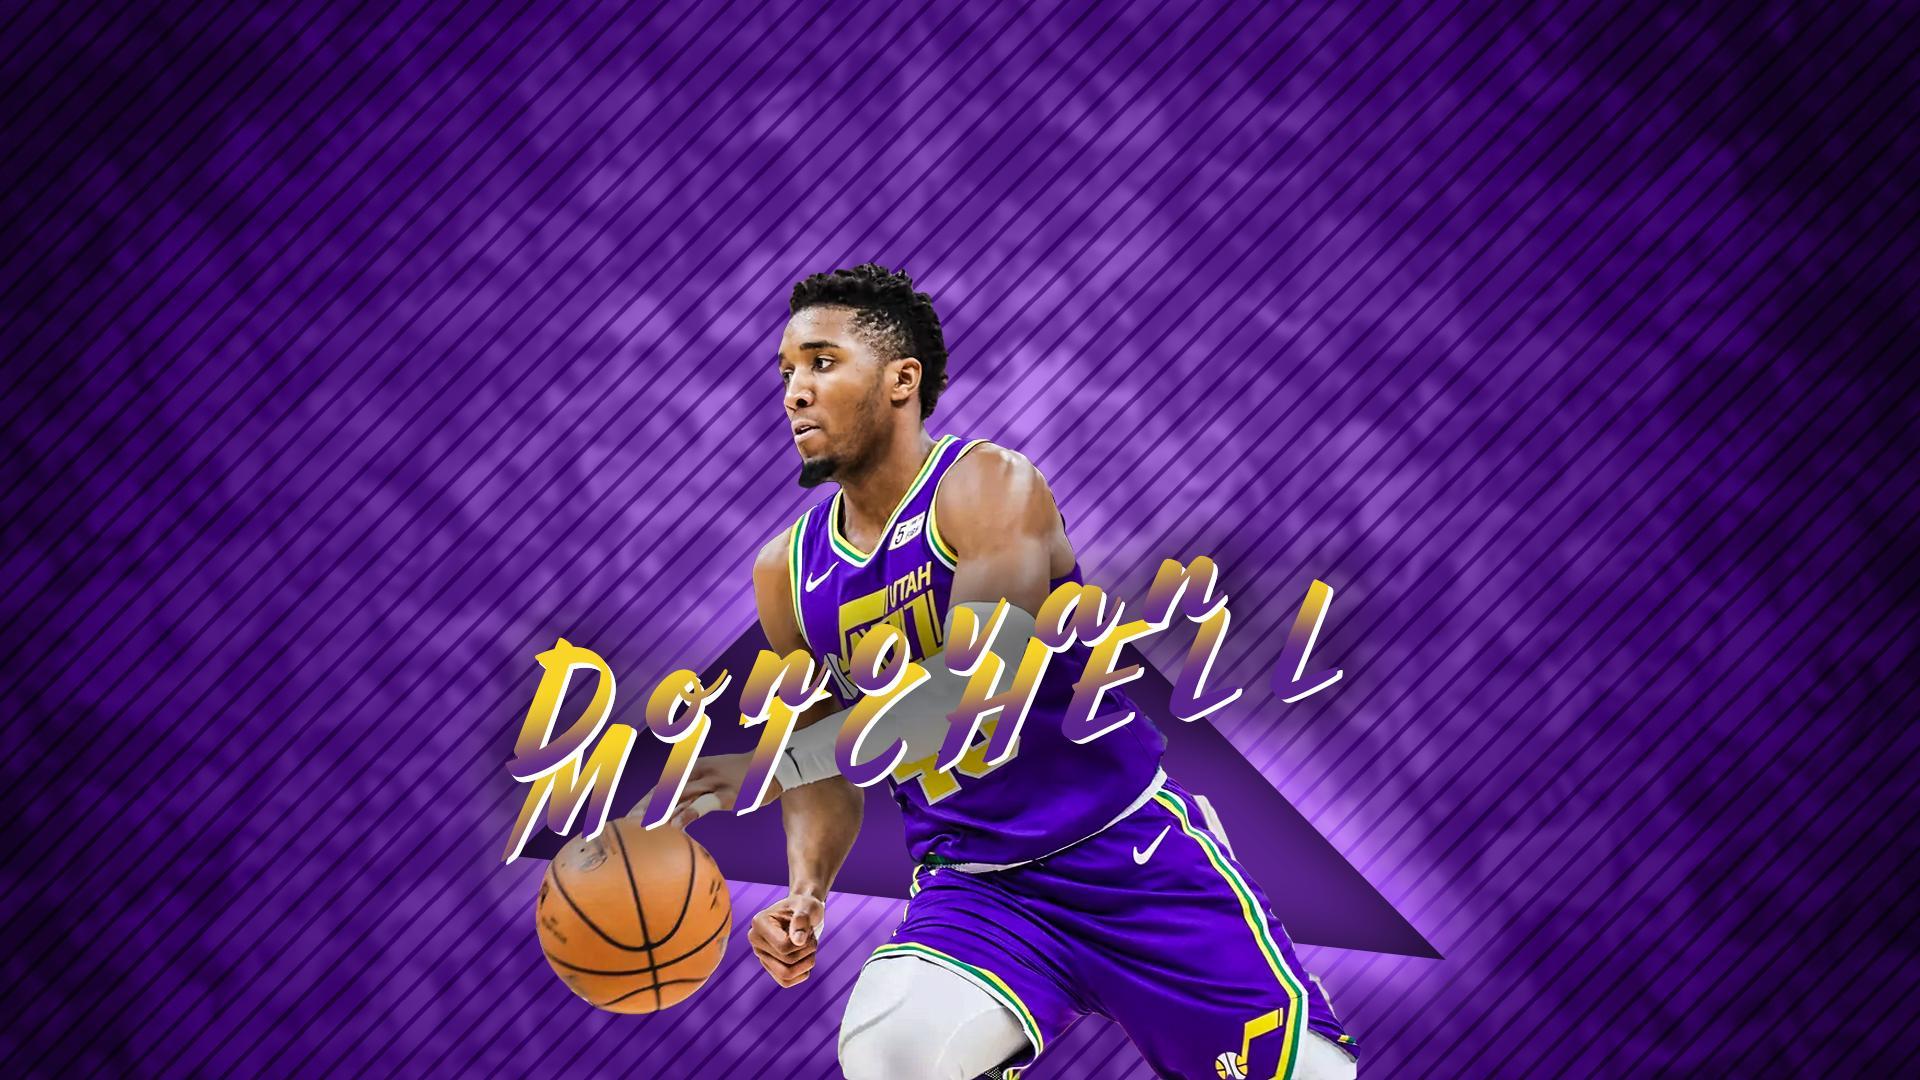 Donovan Mitchell Wallpapers Top Free Donovan Mitchell Backgrounds Wallpaperaccess